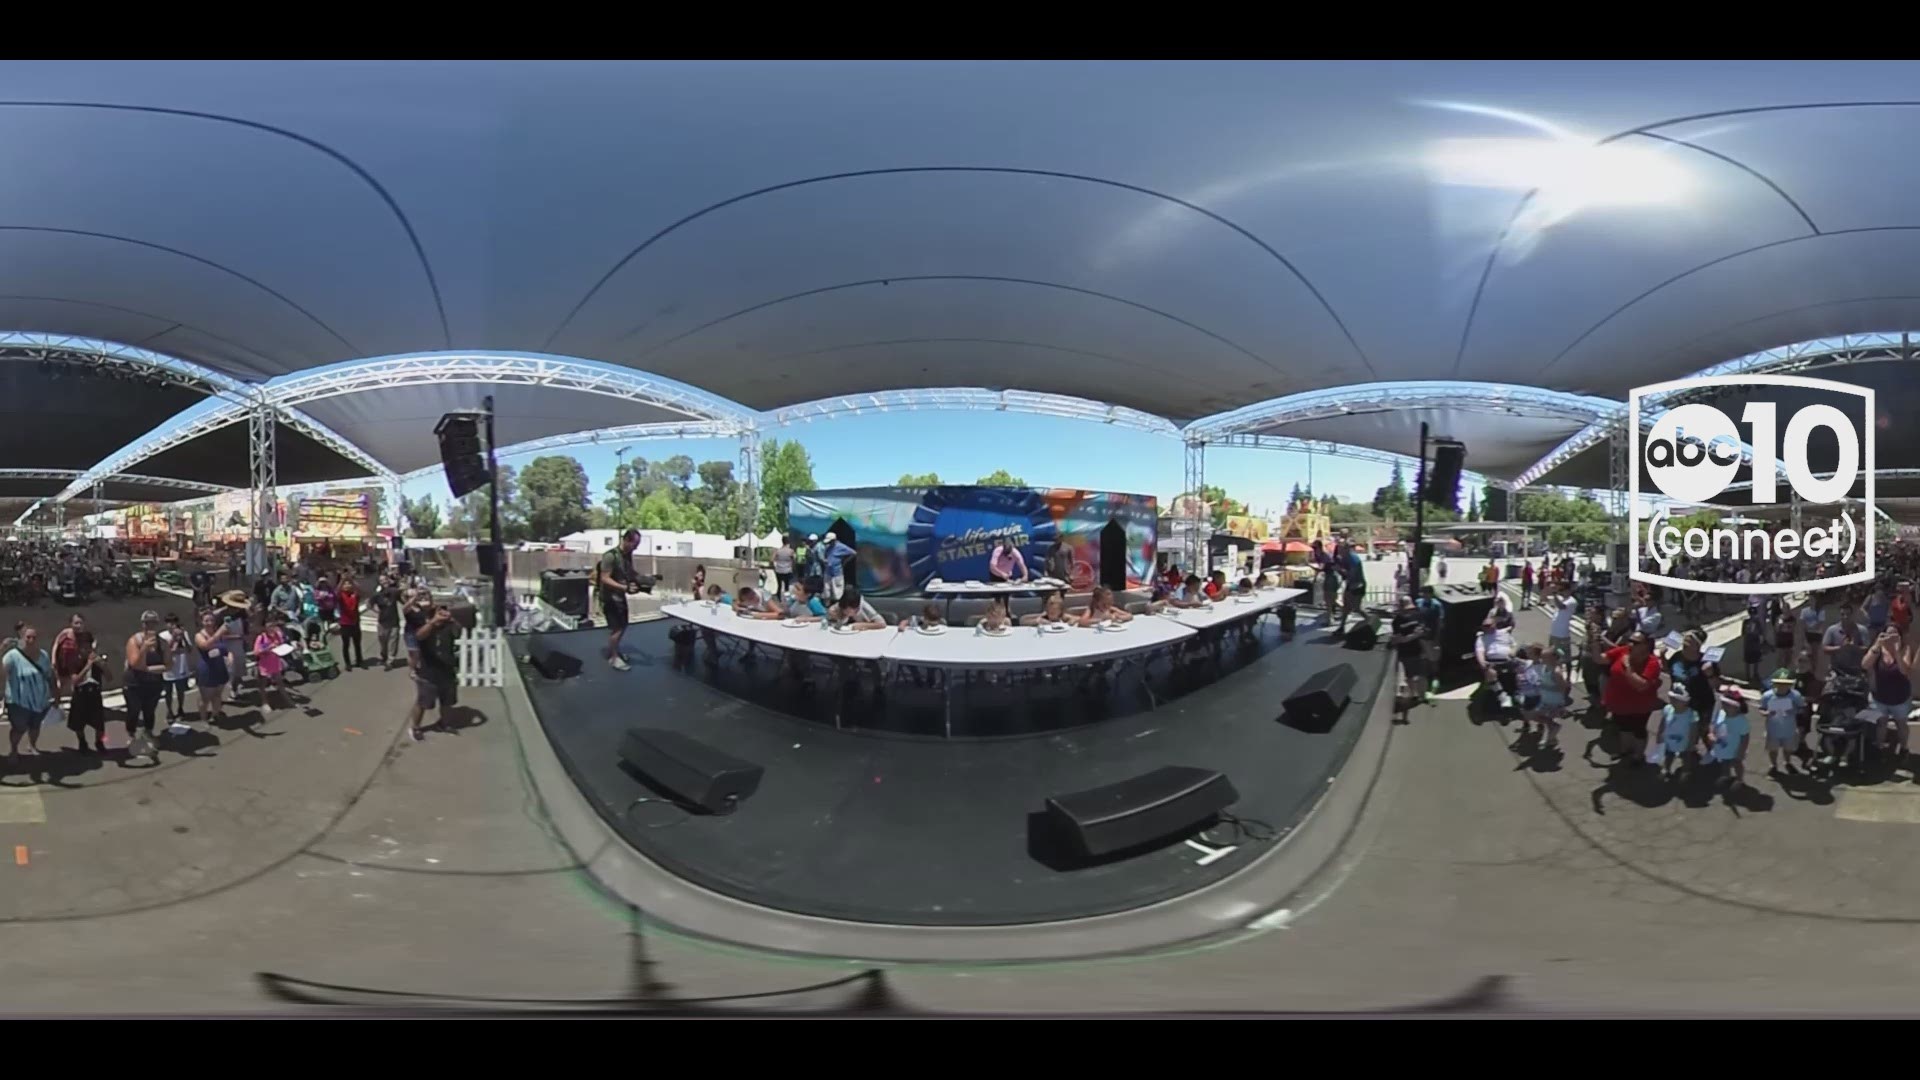 We took a 360 degree camera to the State Fair. Look at what we saw!